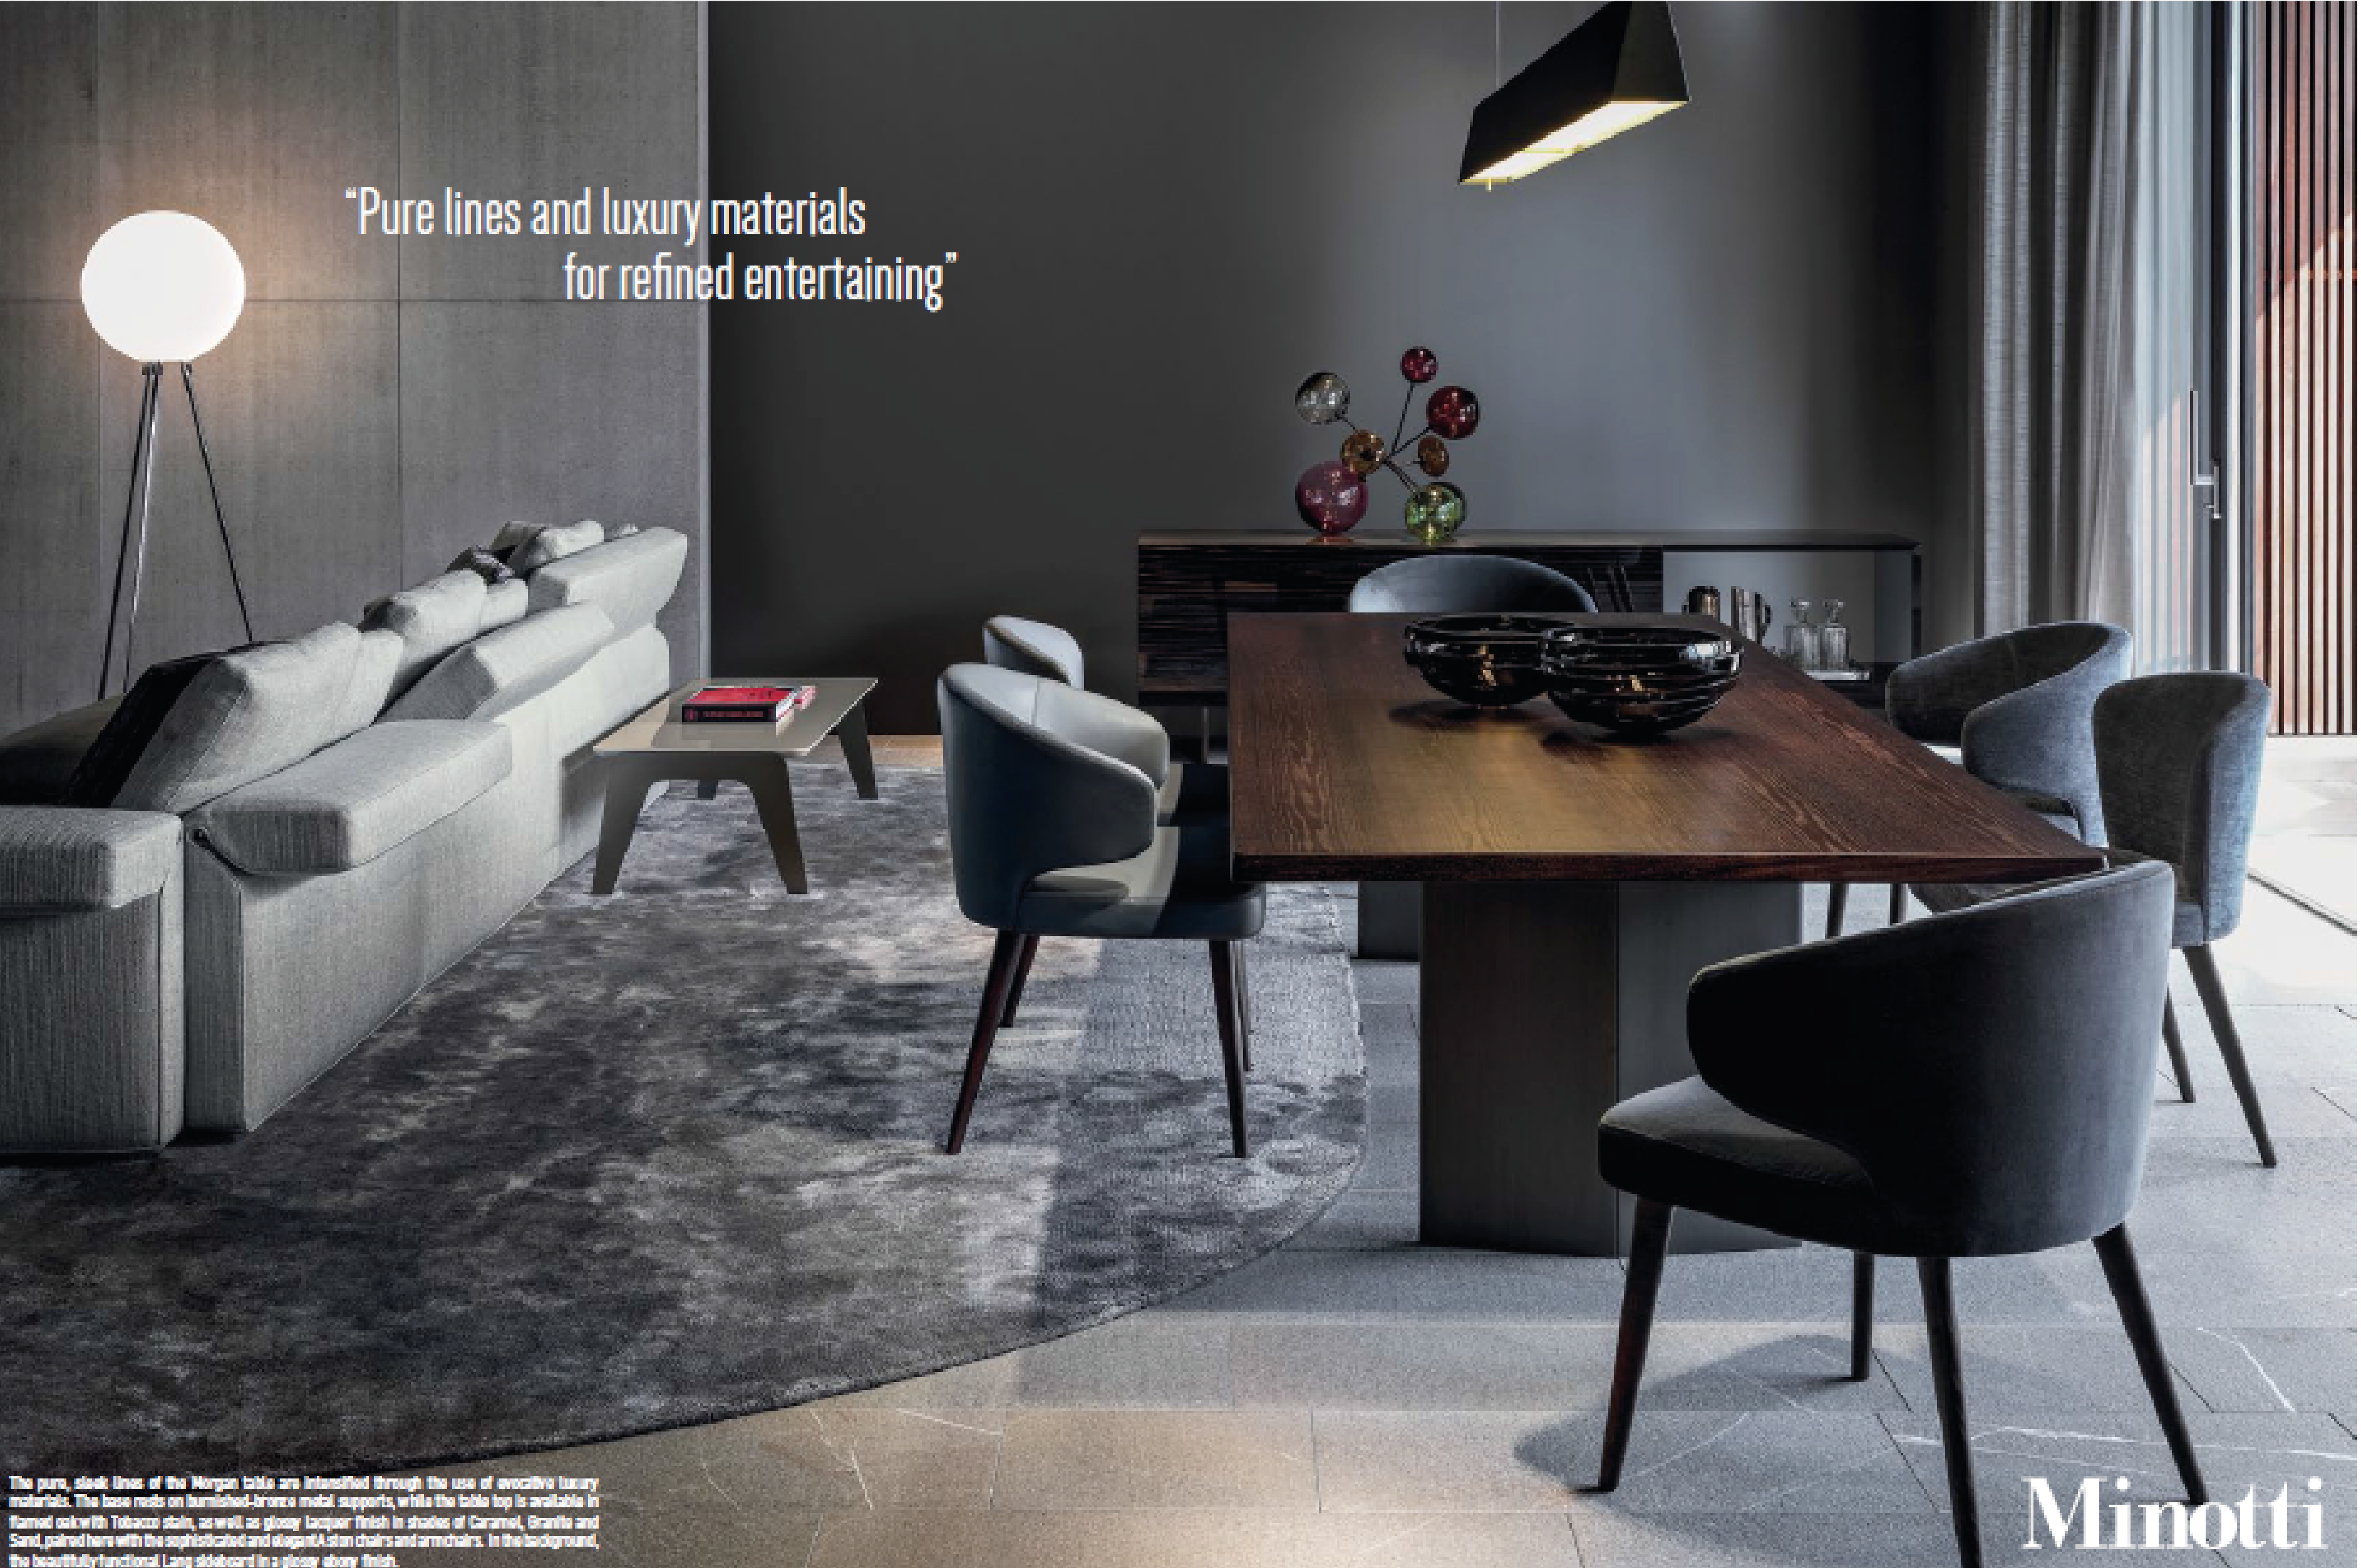 Minotti Special 9 Pages Ad Campaign In Oct Wallpaper - Minotti Dining Room Tables , HD Wallpaper & Backgrounds